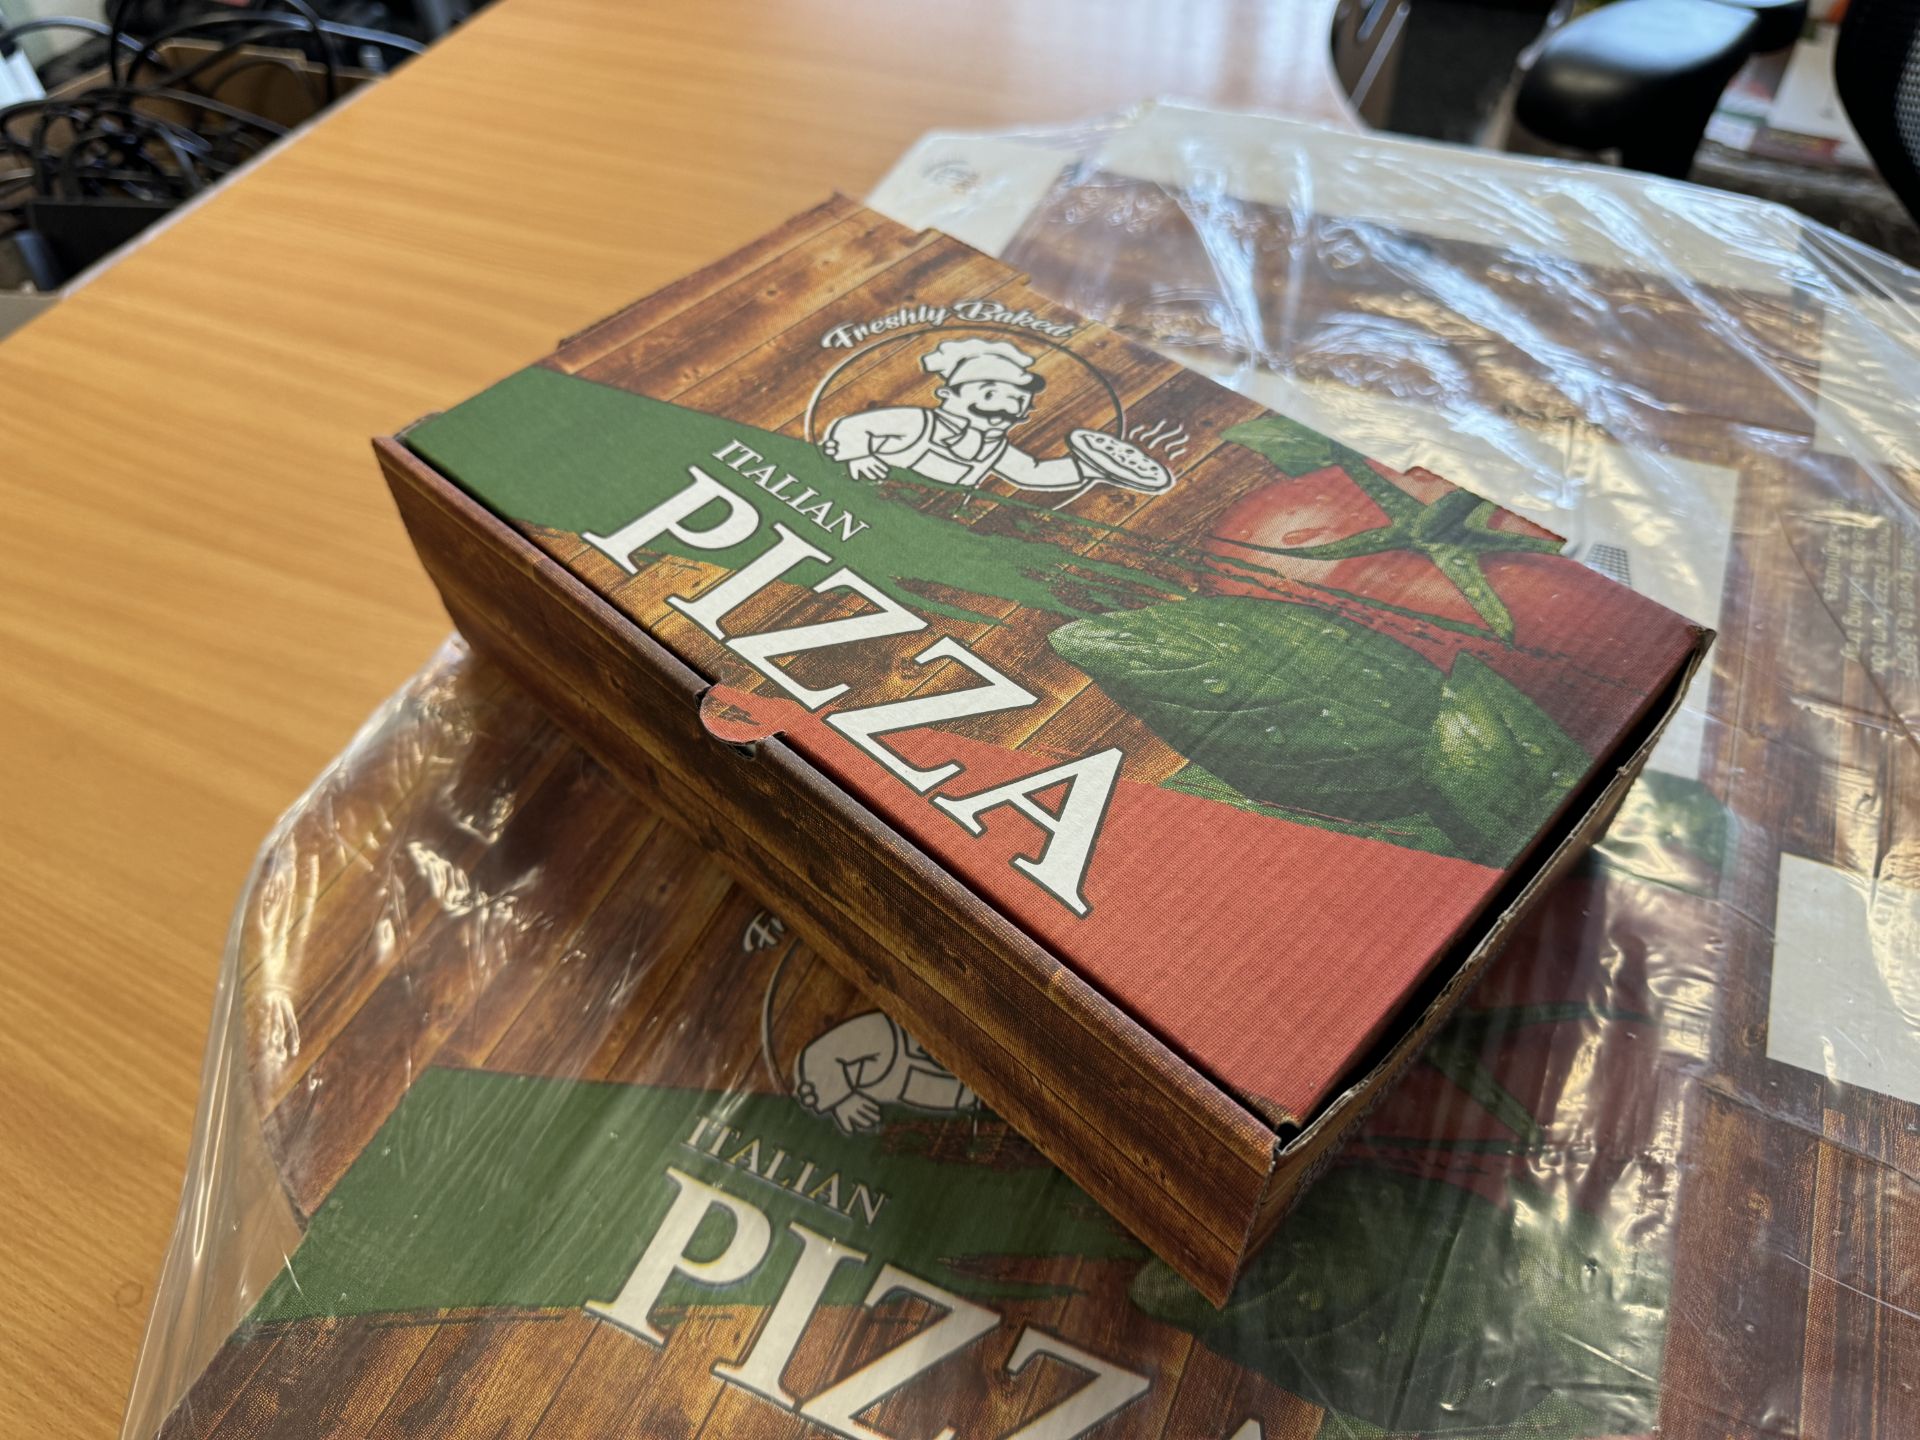 Circa 900 - Italian Pizza Calzone Boxes (Cardboard) - Multiple Uses RRP £130 - Image 3 of 8